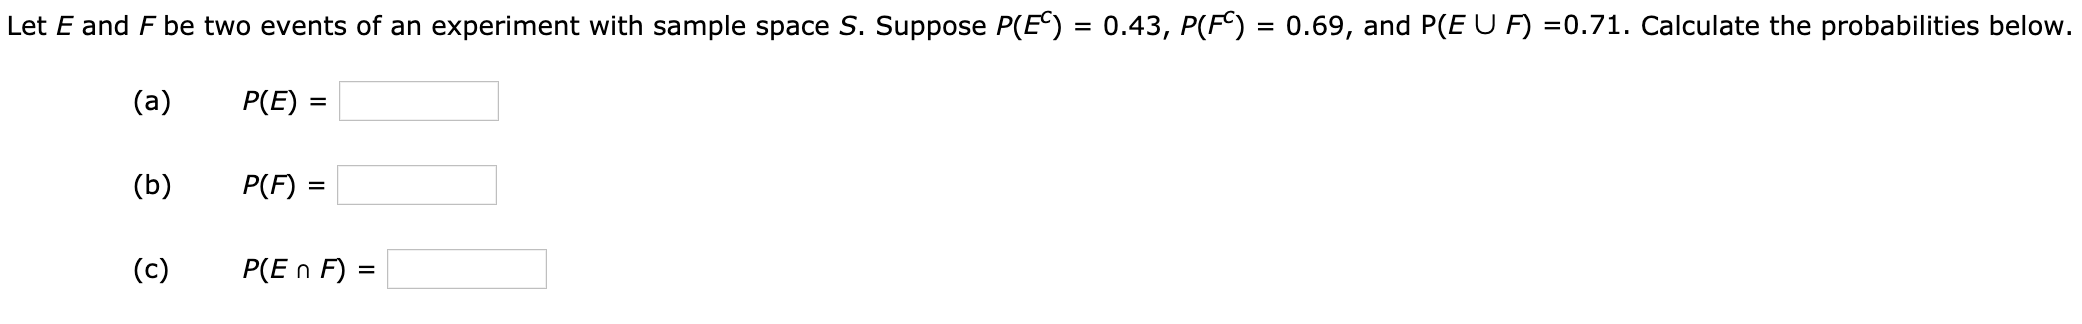 Let E and F be two events of an experiment with sample space S. Suppose P(E) = 0.43, P(F) = 0.69, and P(E U F) =0.71. Calculate the probabilities below.
%3D
(a)
P(E) =
(b)
P(F) =
(c)
P(E n F) =
